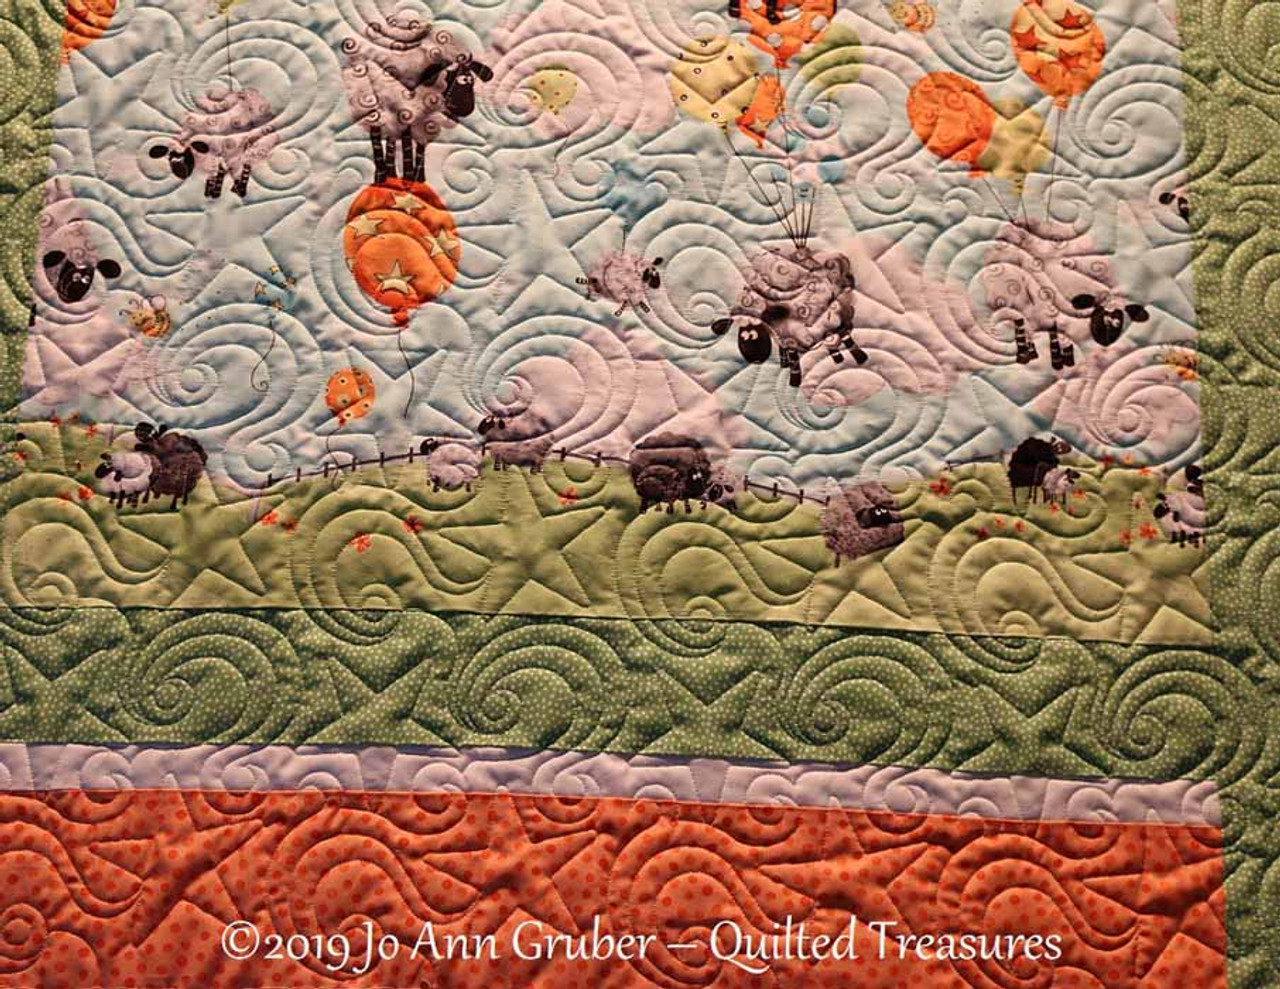 Free Hand Quilting Patterns,  for Quilter » Blog Archive » Lockport  Hand Quilting Pattern Catalog